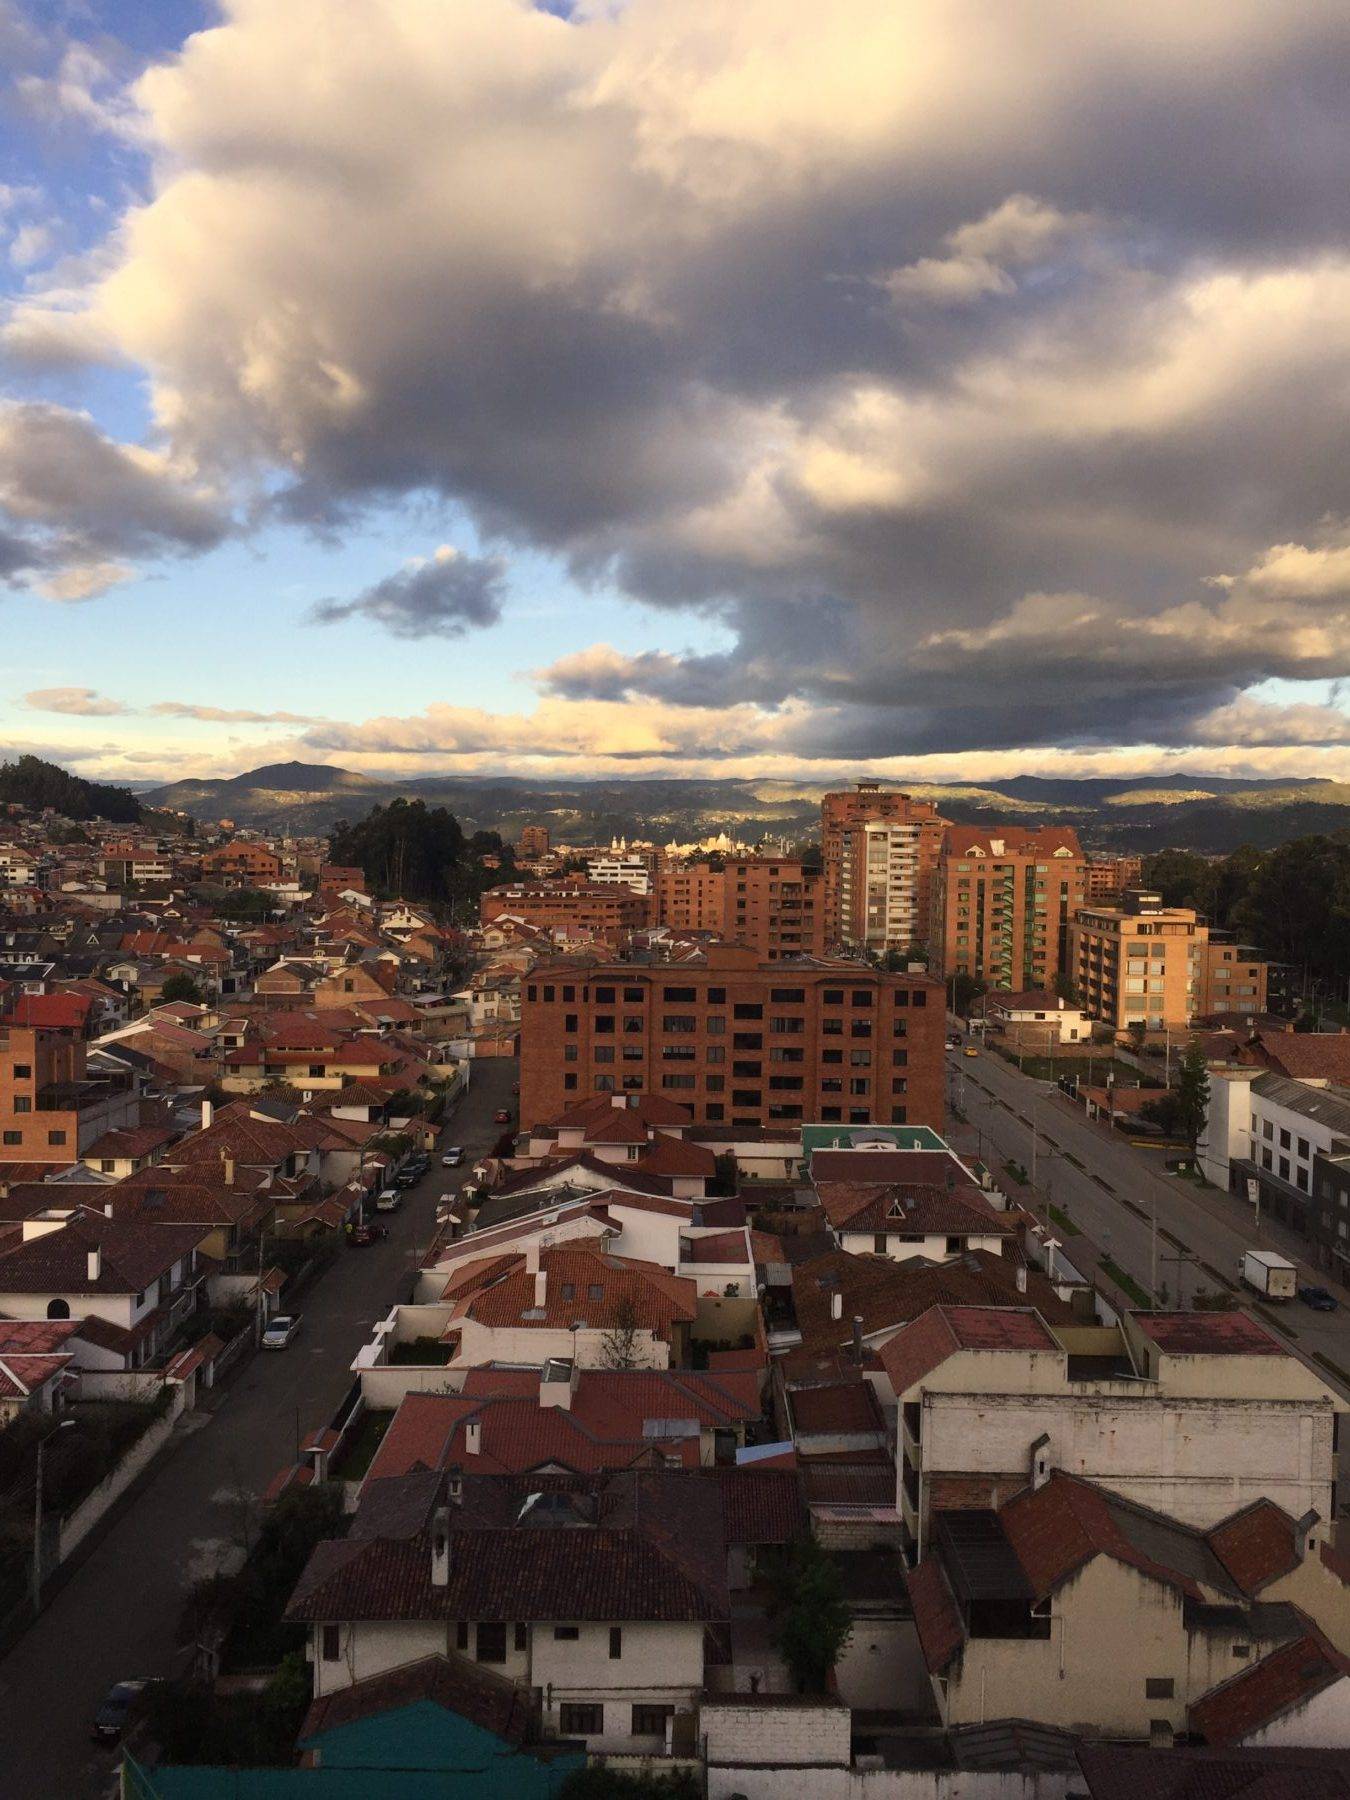 The view of Cuenca, Ecuador from my mother's balcony